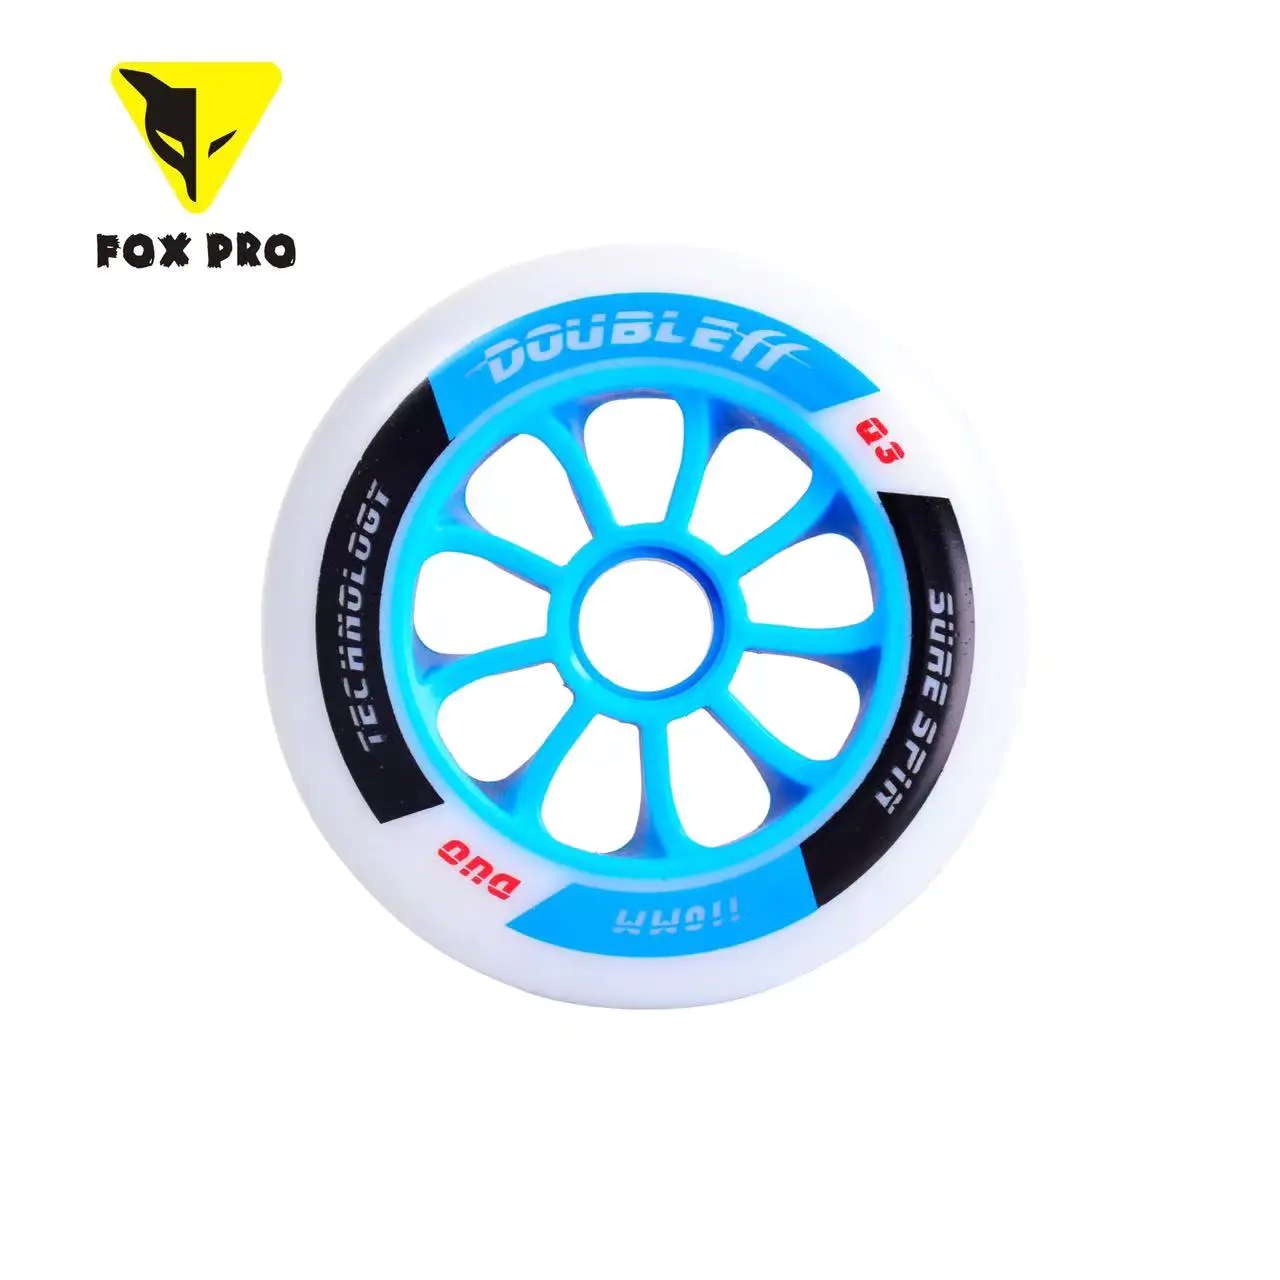 Double FF Professional Speed Skate Wheels 90mm/100mm/110mm/125mm Double Layer Double Hardness High Resilience Speed Skate Wheels